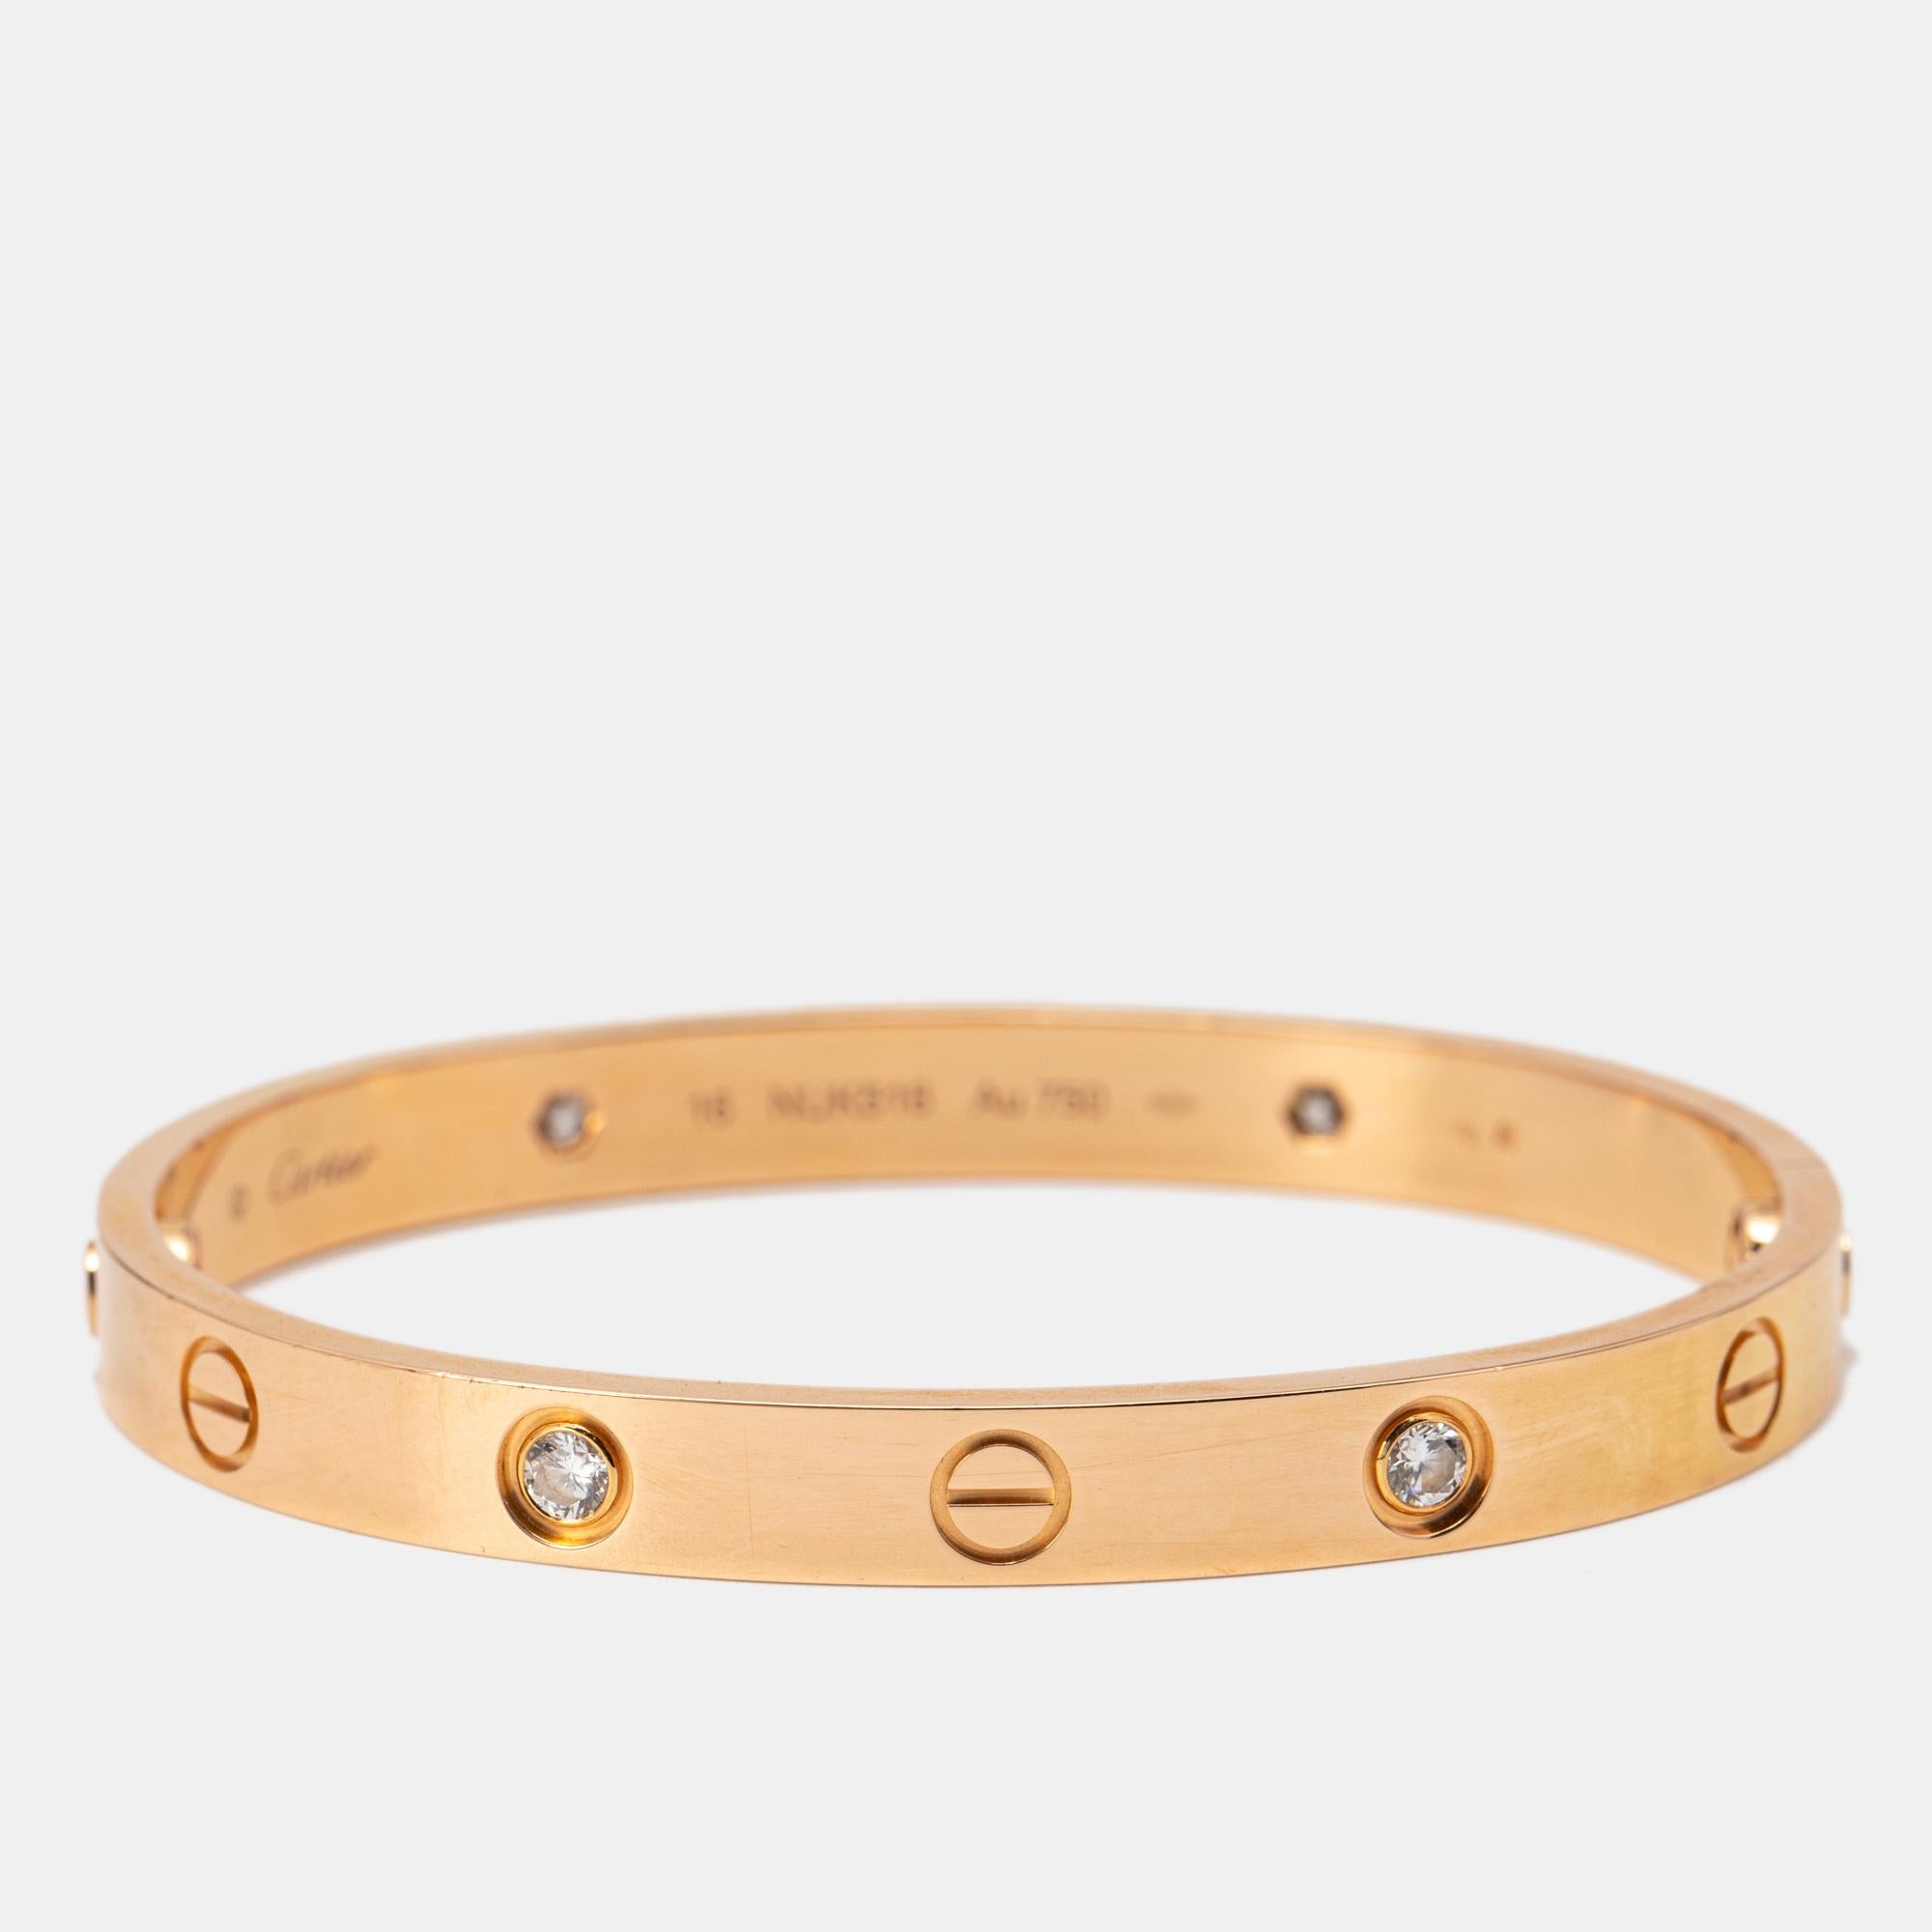 Cartier's Love bracelet is a modern symbol of luxury and a way to lock in one's love. Designed in an oval shape to comfortably sit around your wrist, the iconic love handcuff is laid with distinct screw motifs and secured by screw closure. This